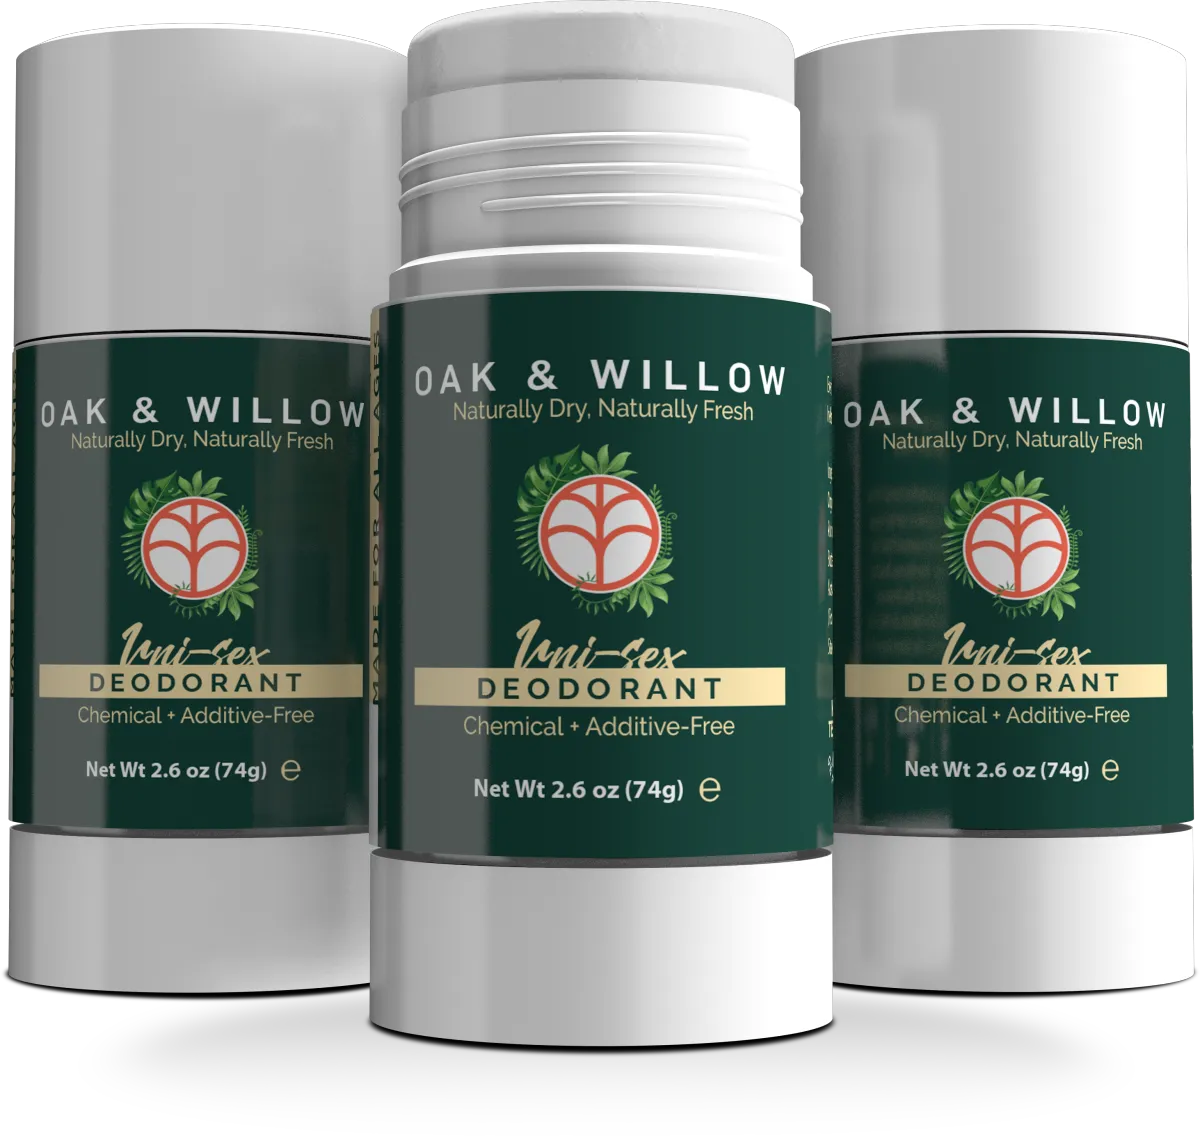 Oak_and_willow